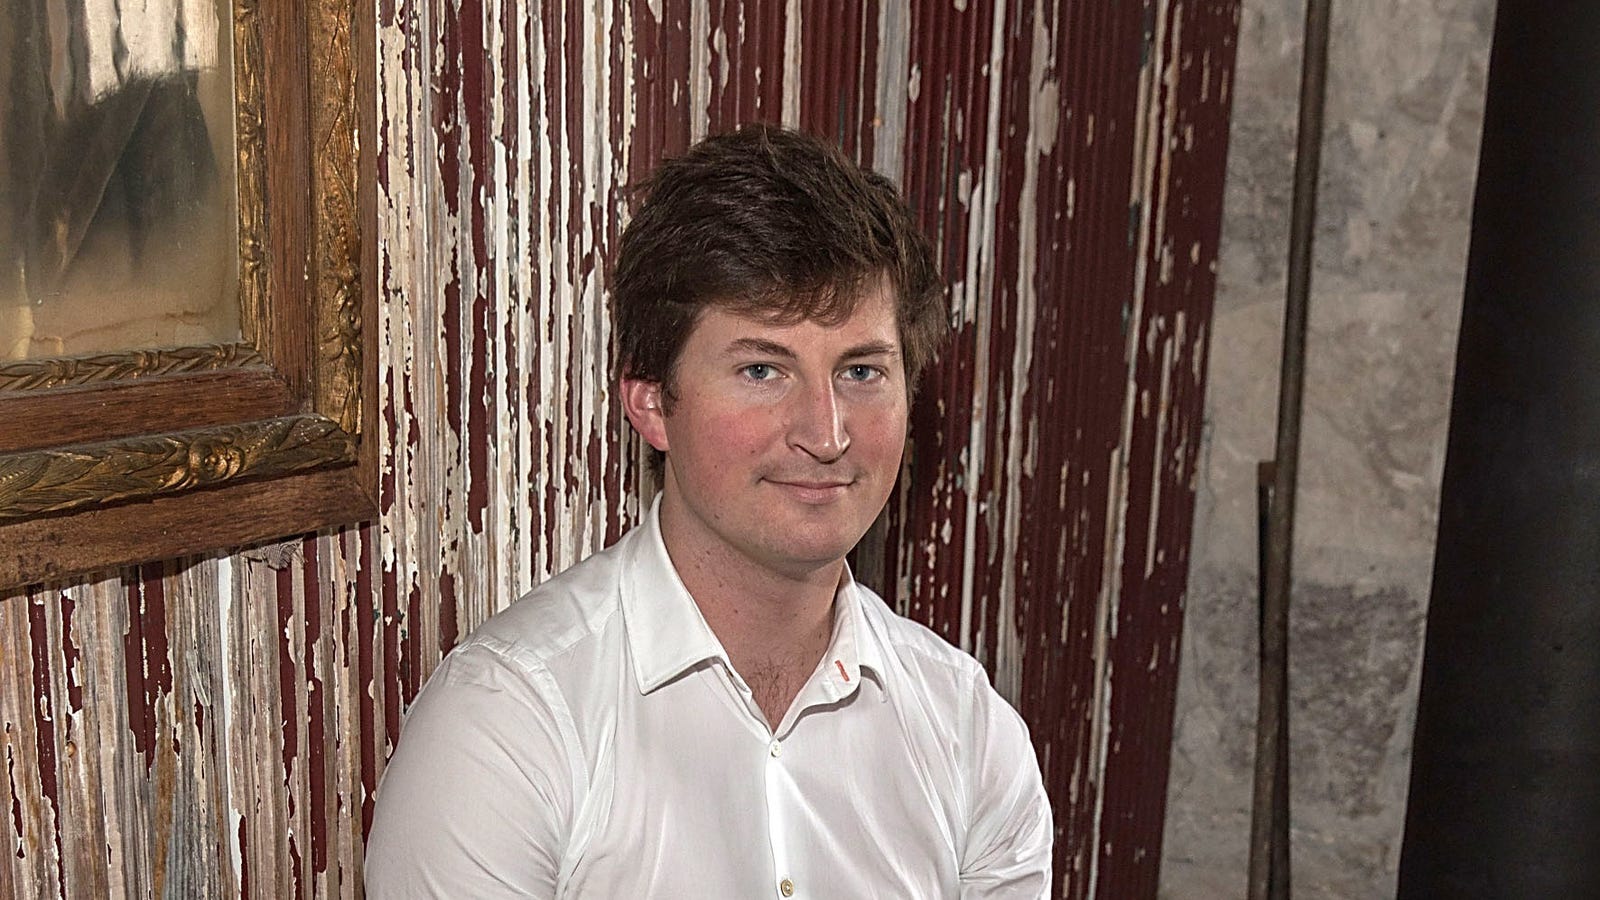 photo of Soylent Founder Steps Down as CEO: 'If You Love Something, Set It Free' image